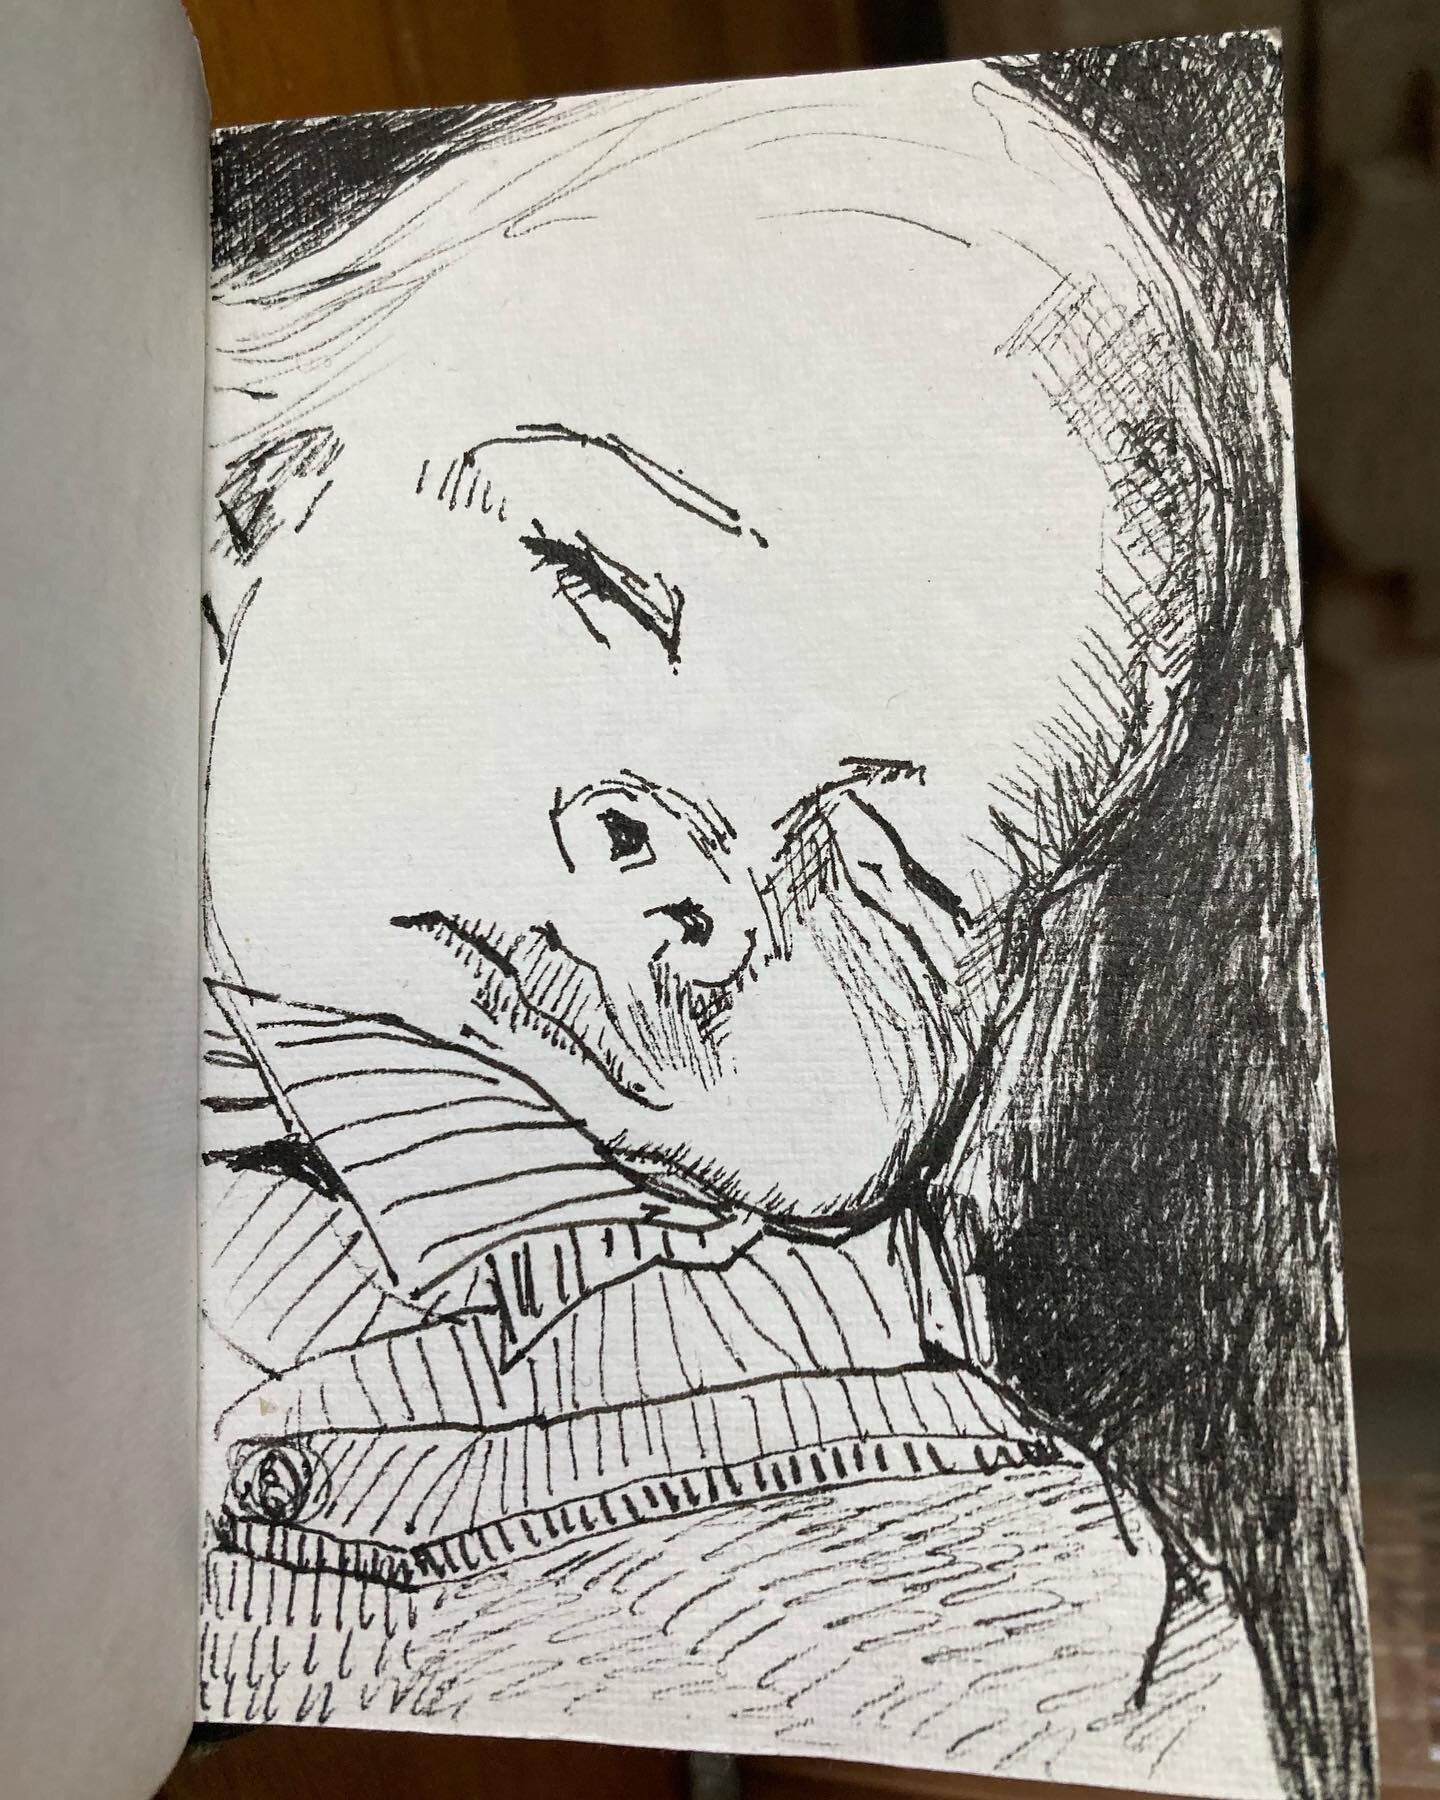 Post daycare nap in the stroller. All tuckered out. 🪓 

Trying to take every few chances I have in the day to do some sketching. A good reminder I got after a chat with @johnmitchellworld after looking through his detailed sketchbook at @tvprojects.